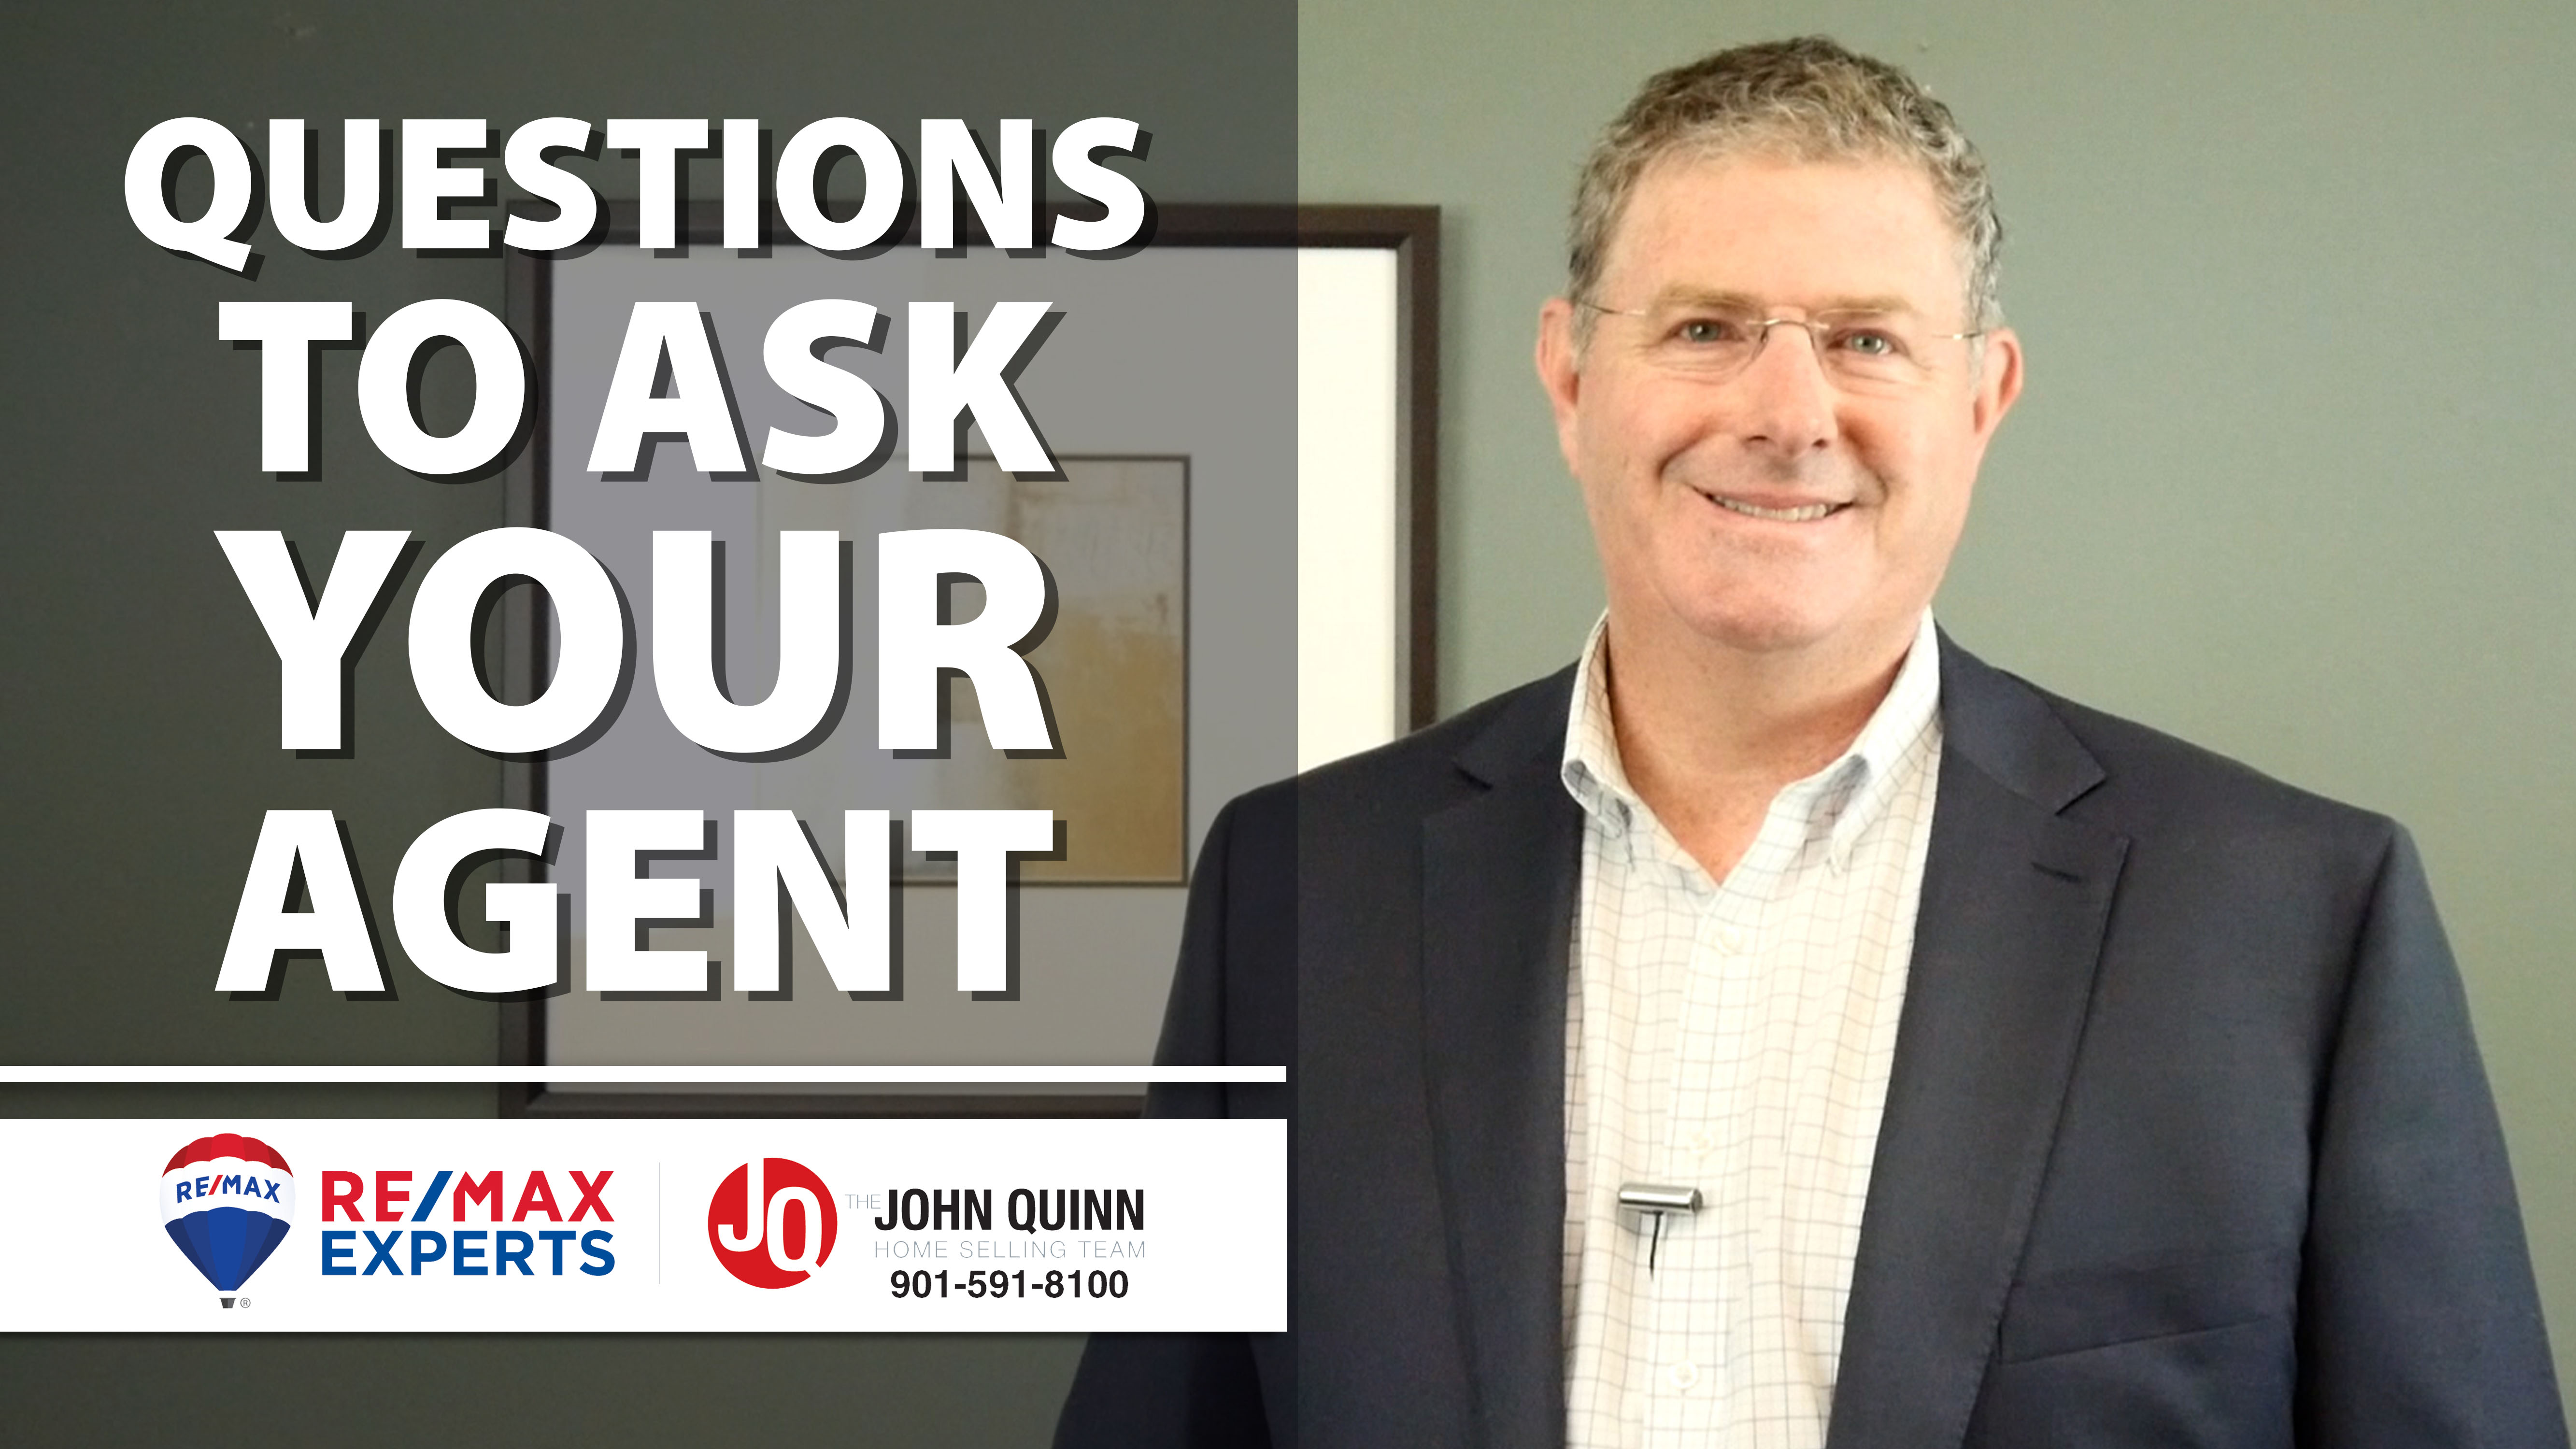 Q: What Questions Should I Ask My Agent?